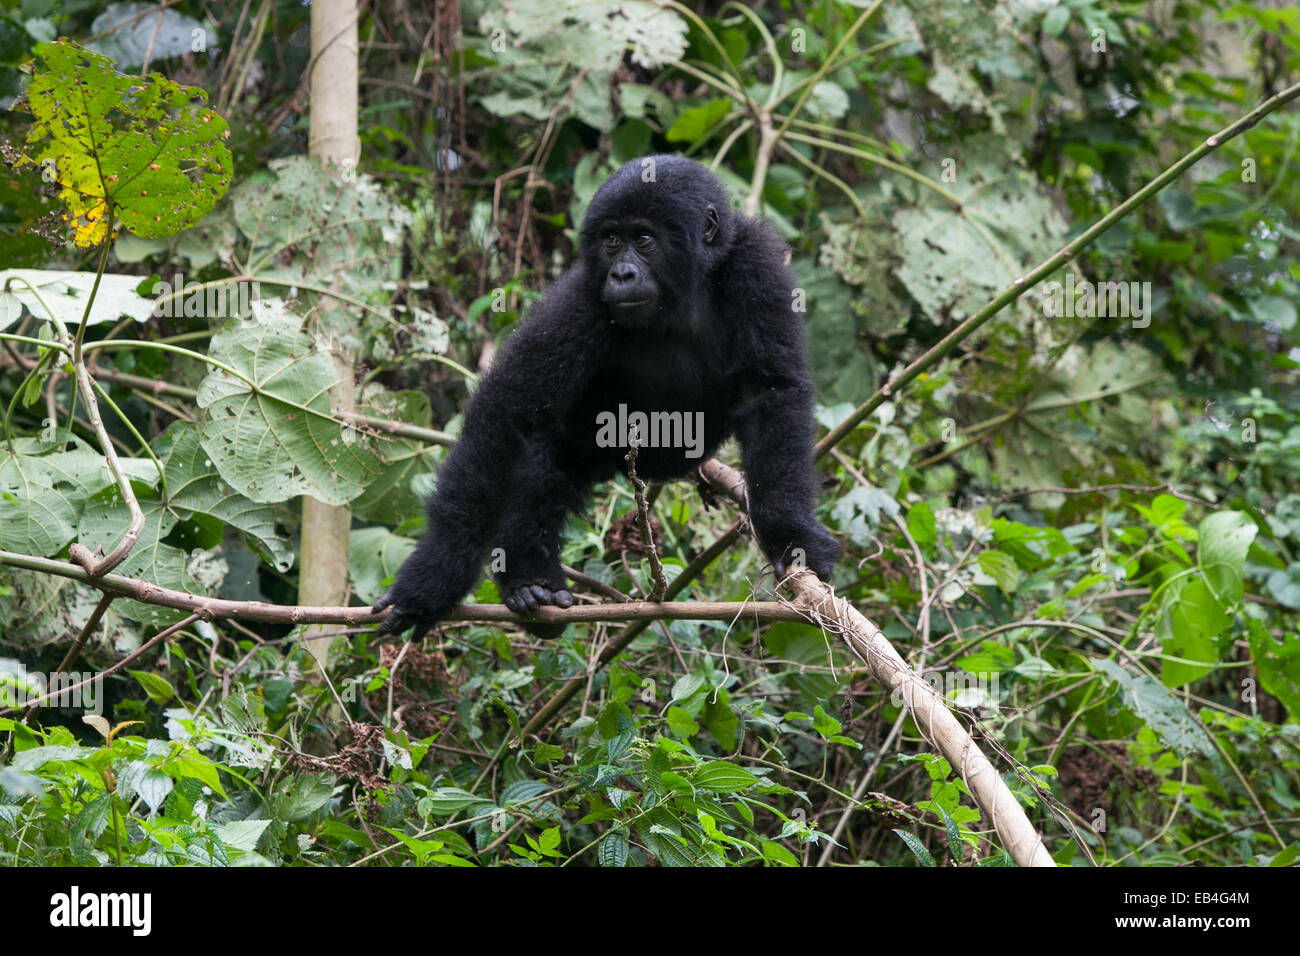 An adolescent gorilla climbs on tree limbs and vines in the impenetrable forest. Stock Photo